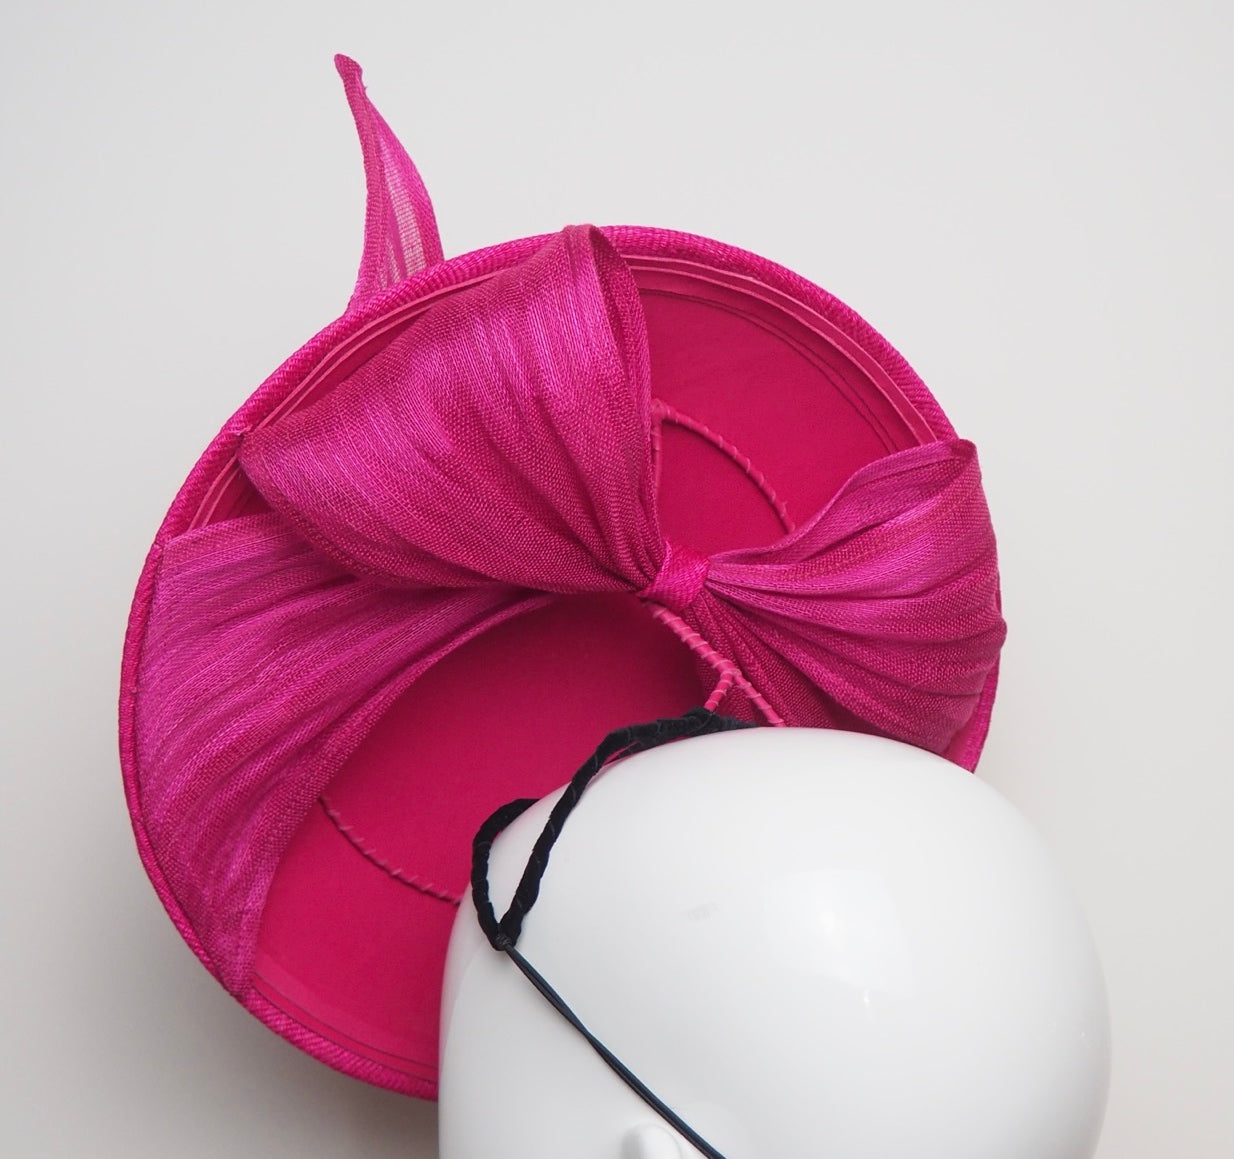 Tied in a Bow - Hot Pink Tinalak Percher with Bow